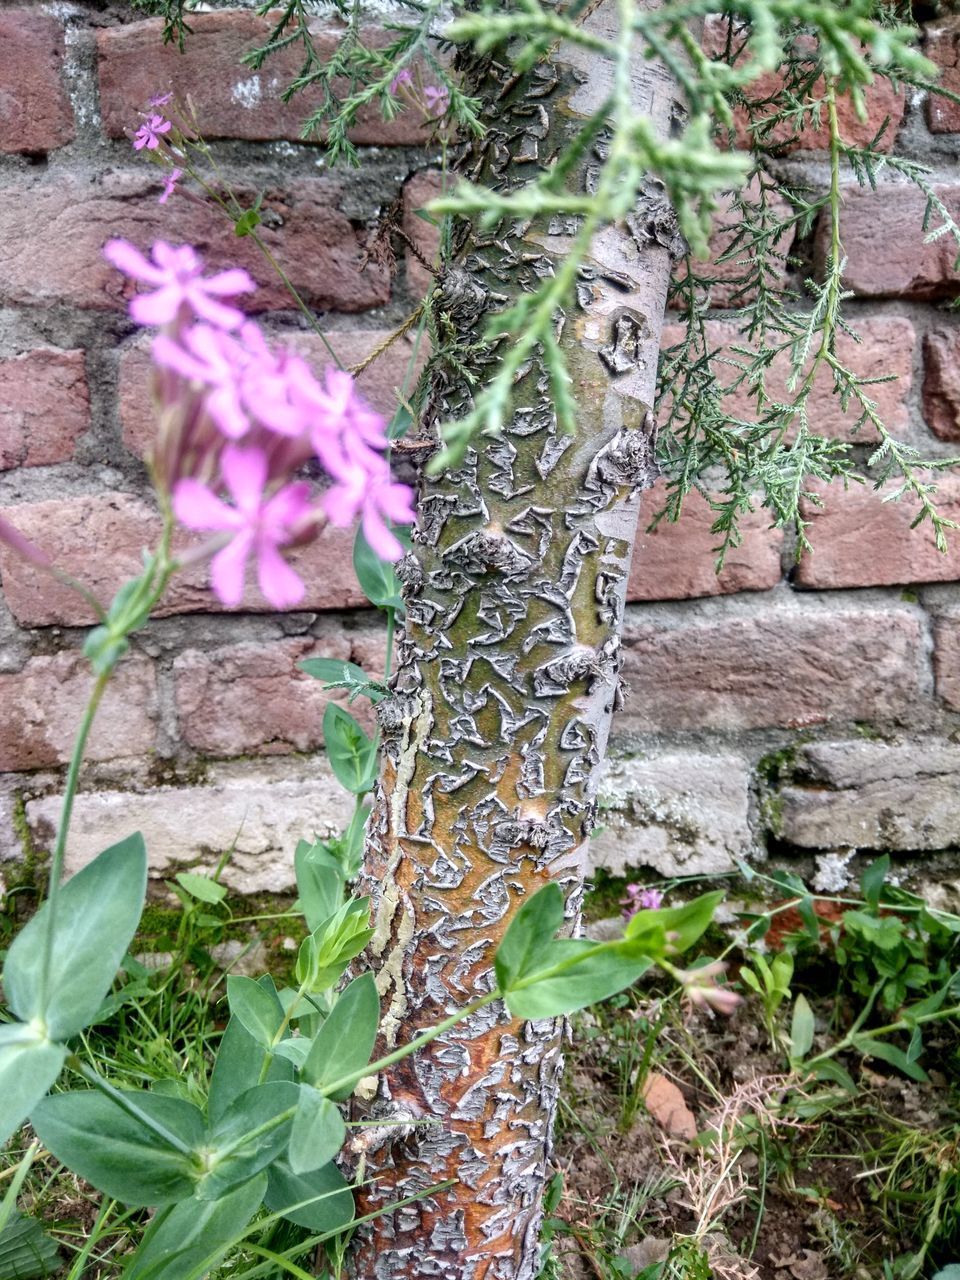 CLOSE-UP OF PURPLE FLOWERING PLANT AGAINST WALL